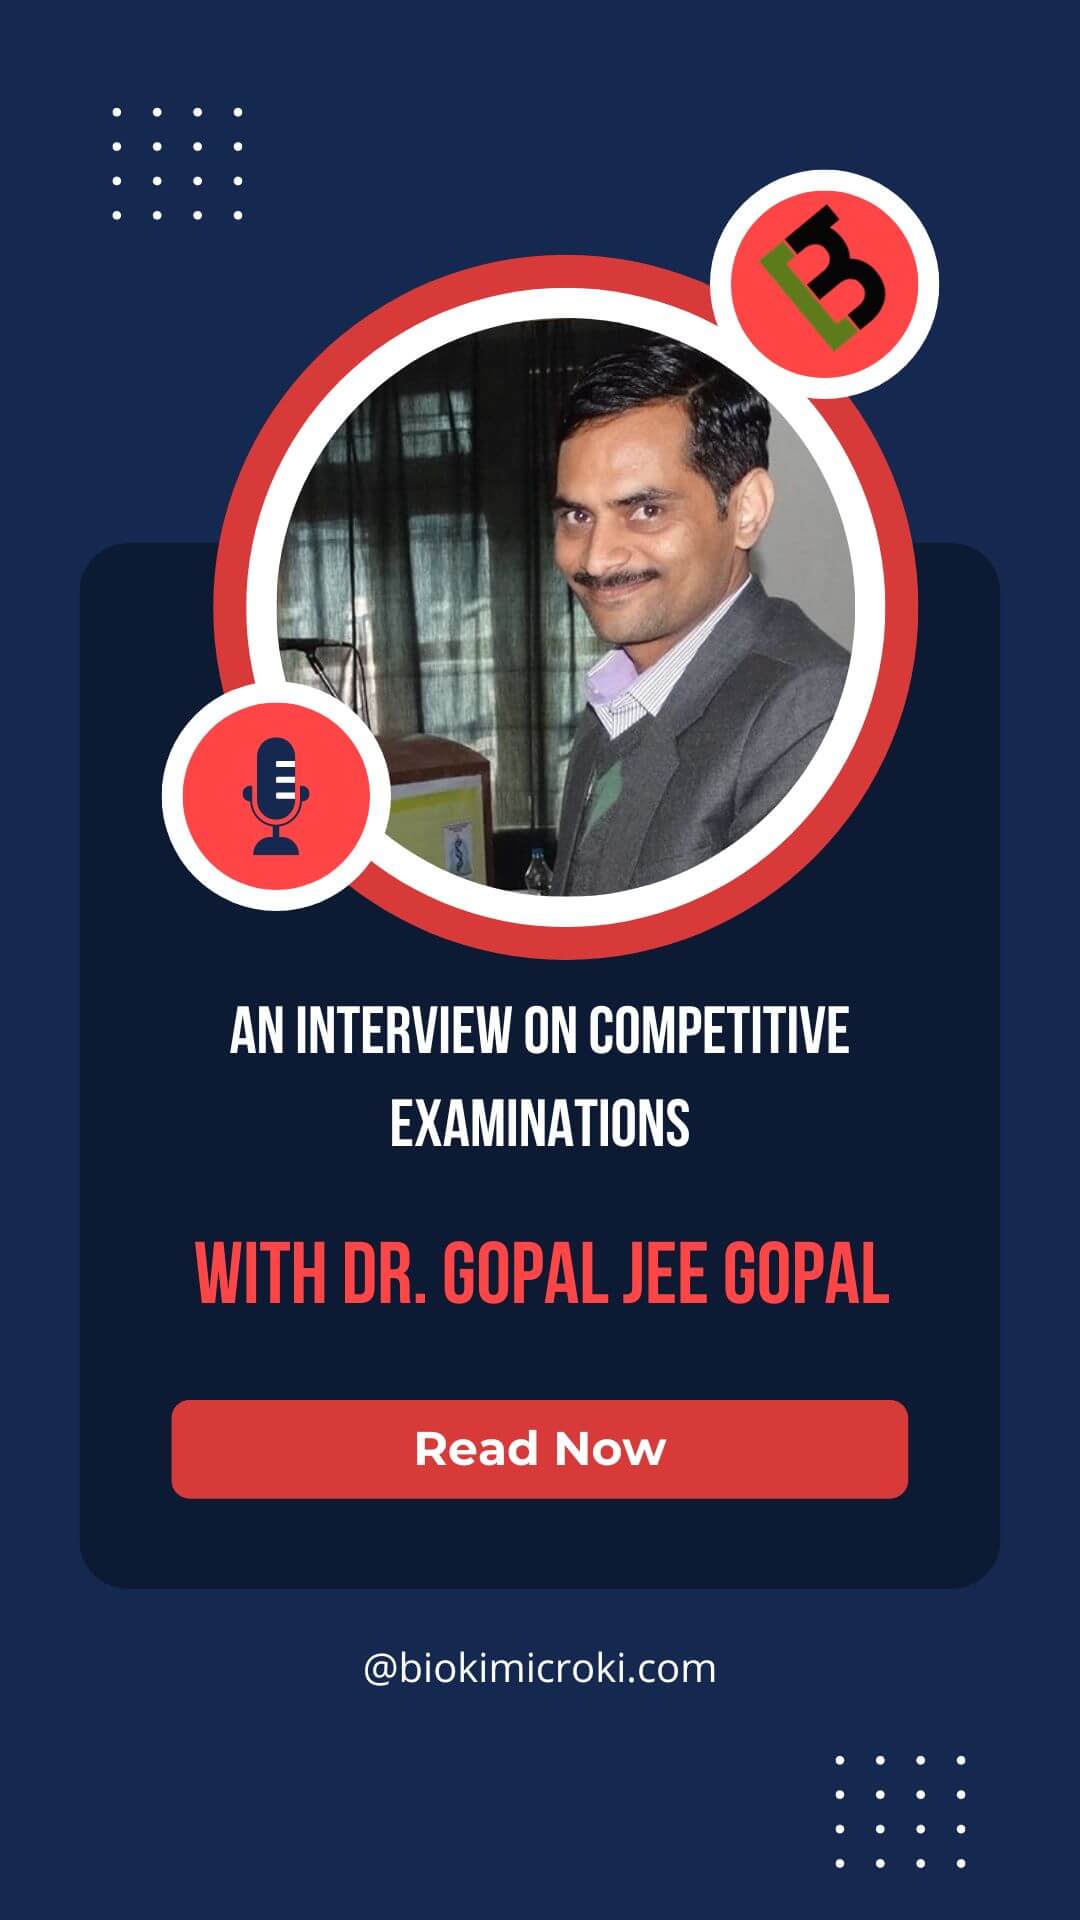 An Interview on Competitive Examinations with Dr. Gopal Jee Gopal